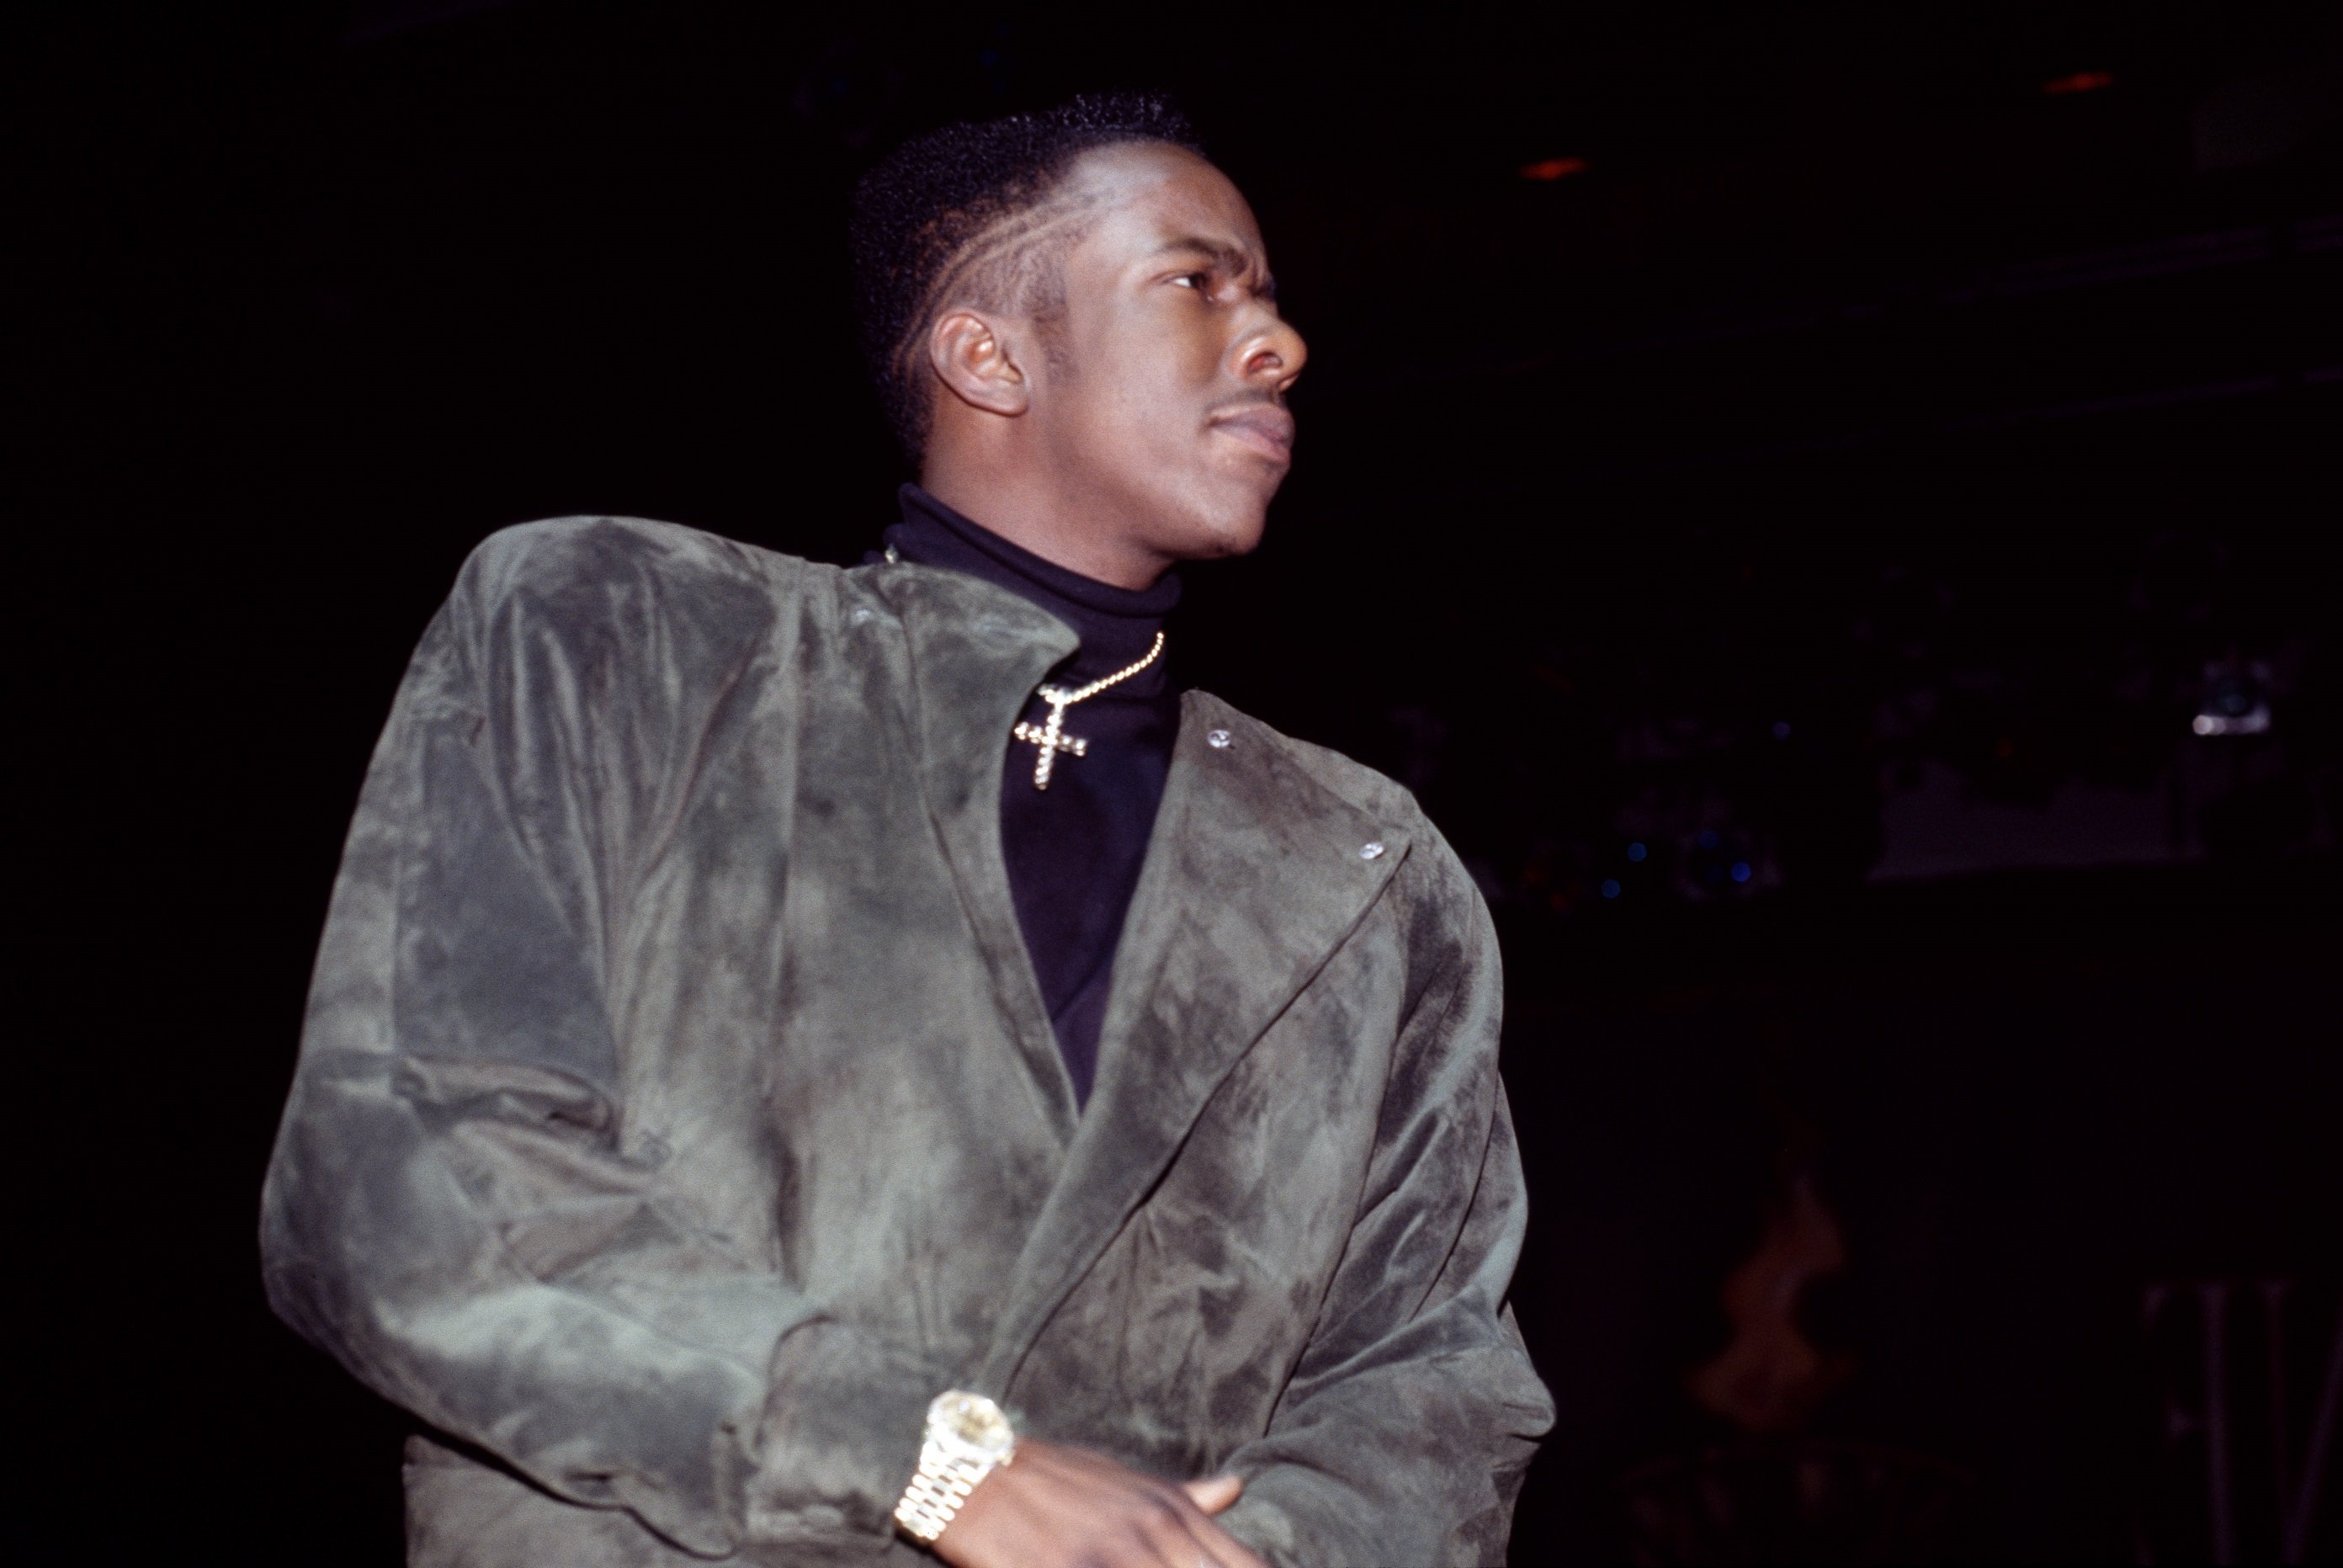 Bobby Brown wearing a cross necklace